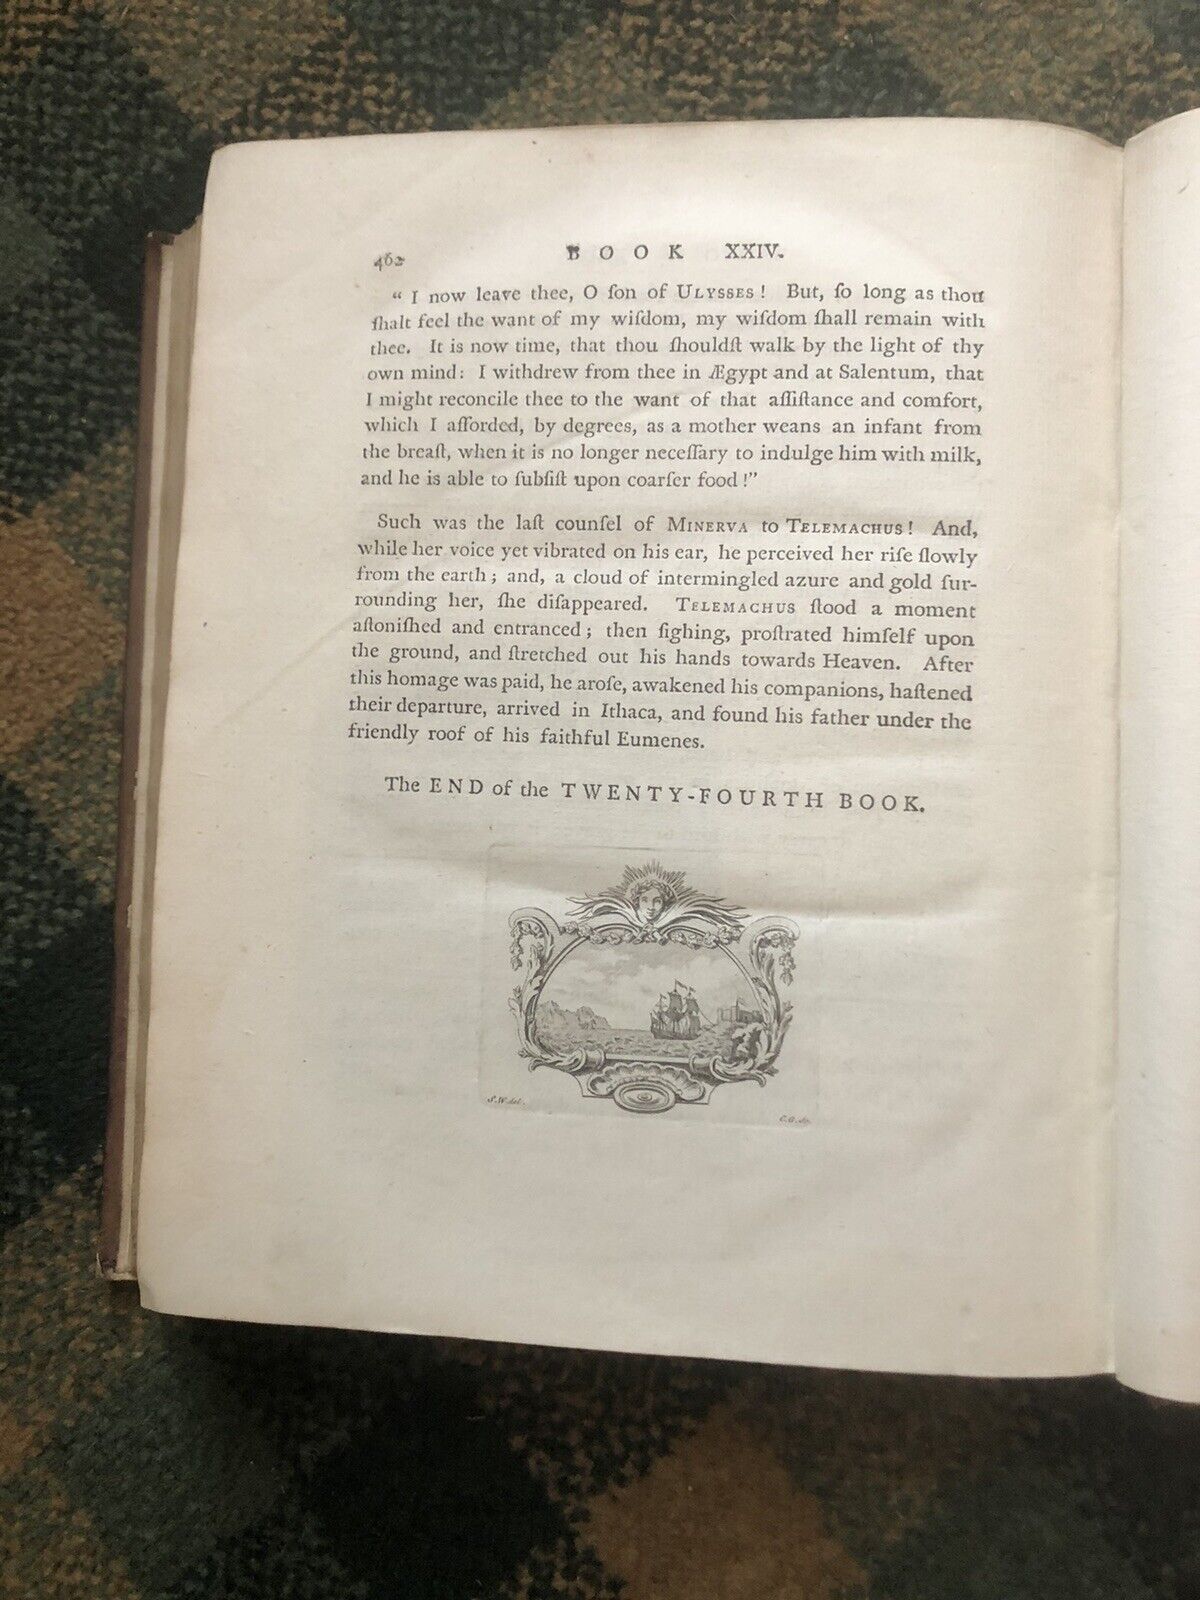 1768 The Adventures of Telemachus The Son of Ulysses : Hawkesworth